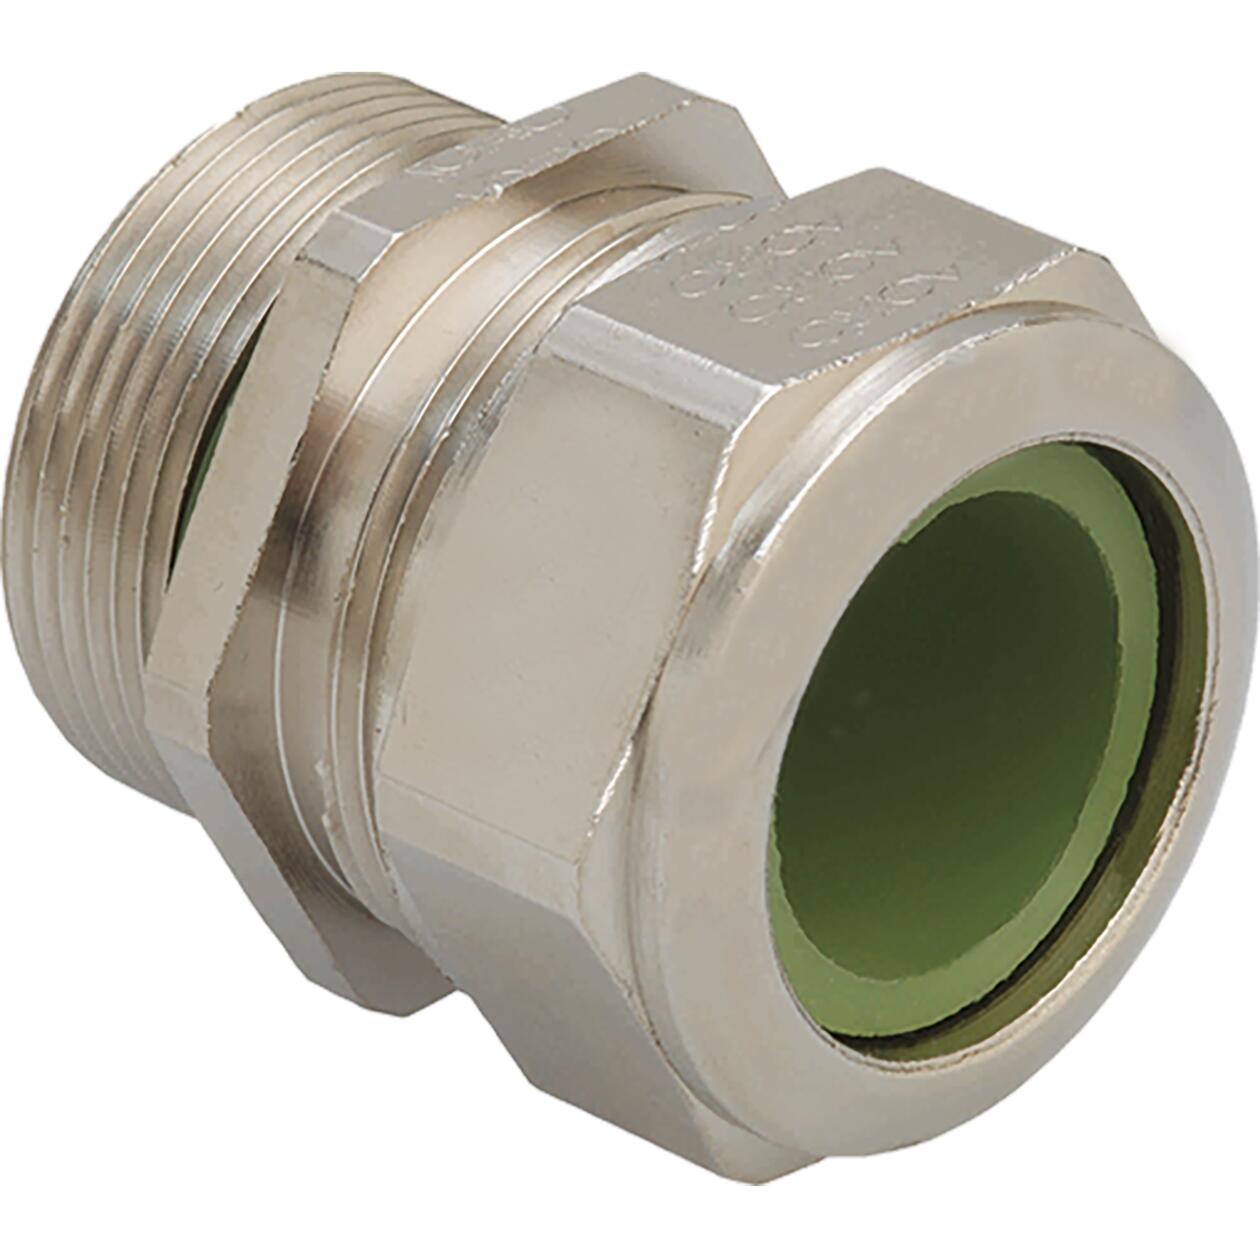 Cable glands nickel-plated brass